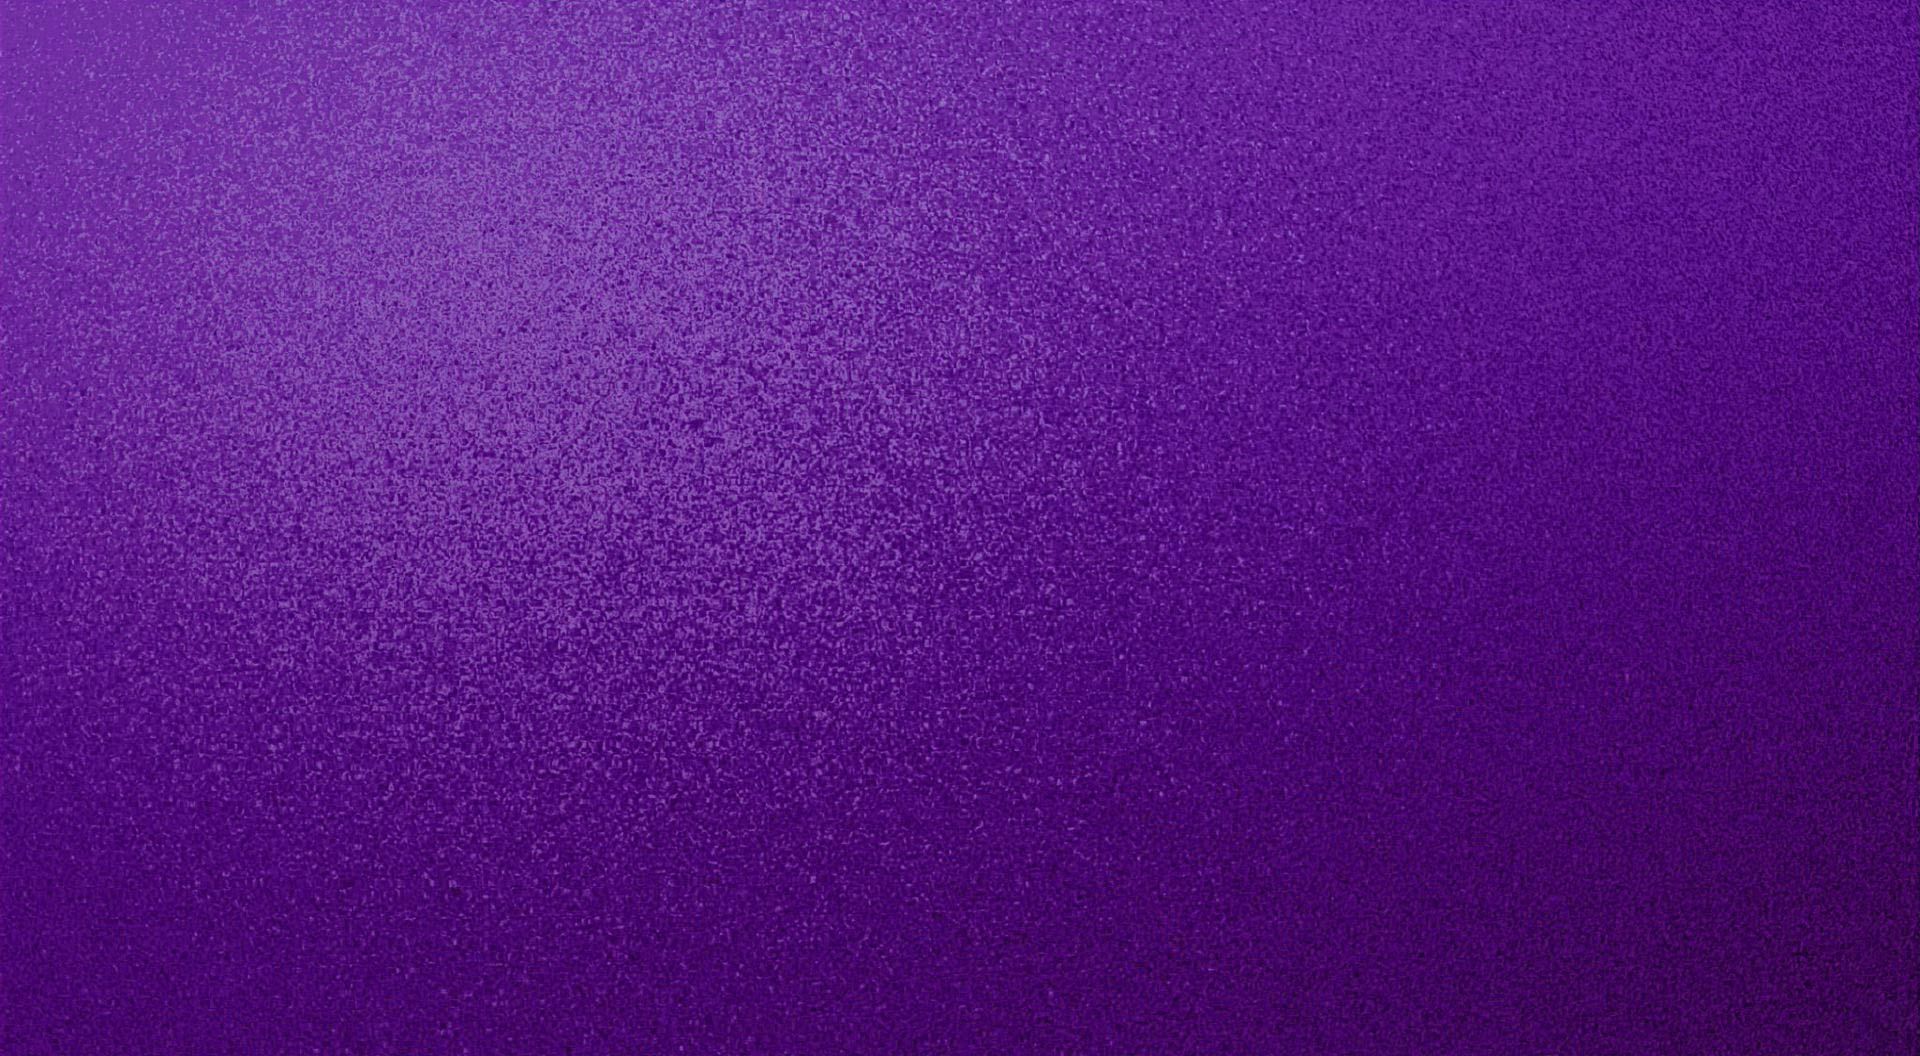 purple background images